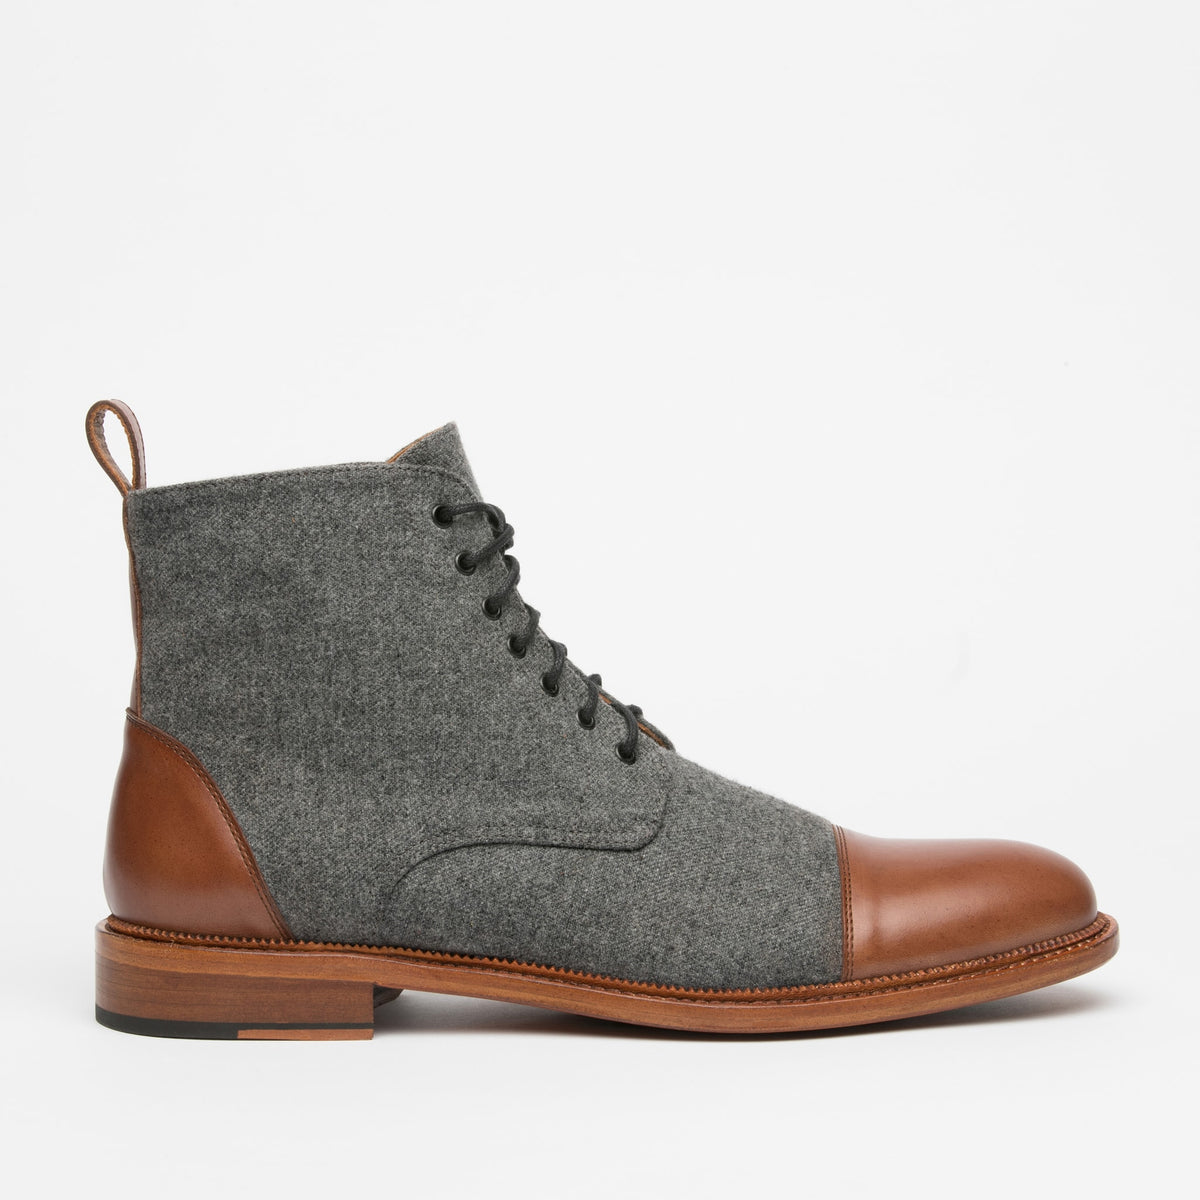 Jack Boot in Grey/Brown side view